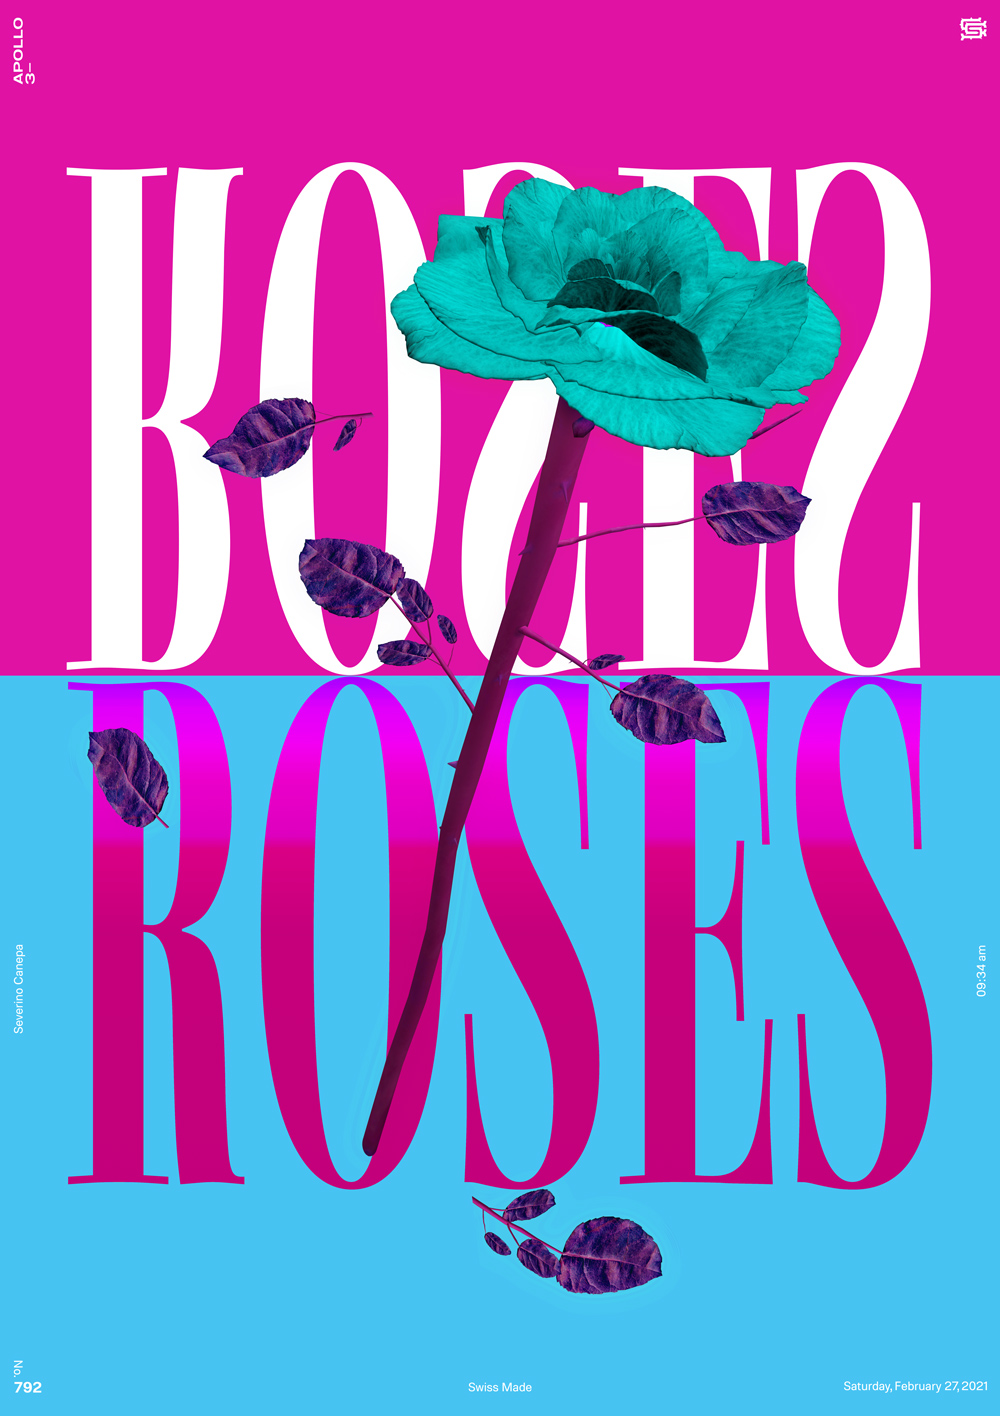 Typographic artwork made with the 3D render of rose